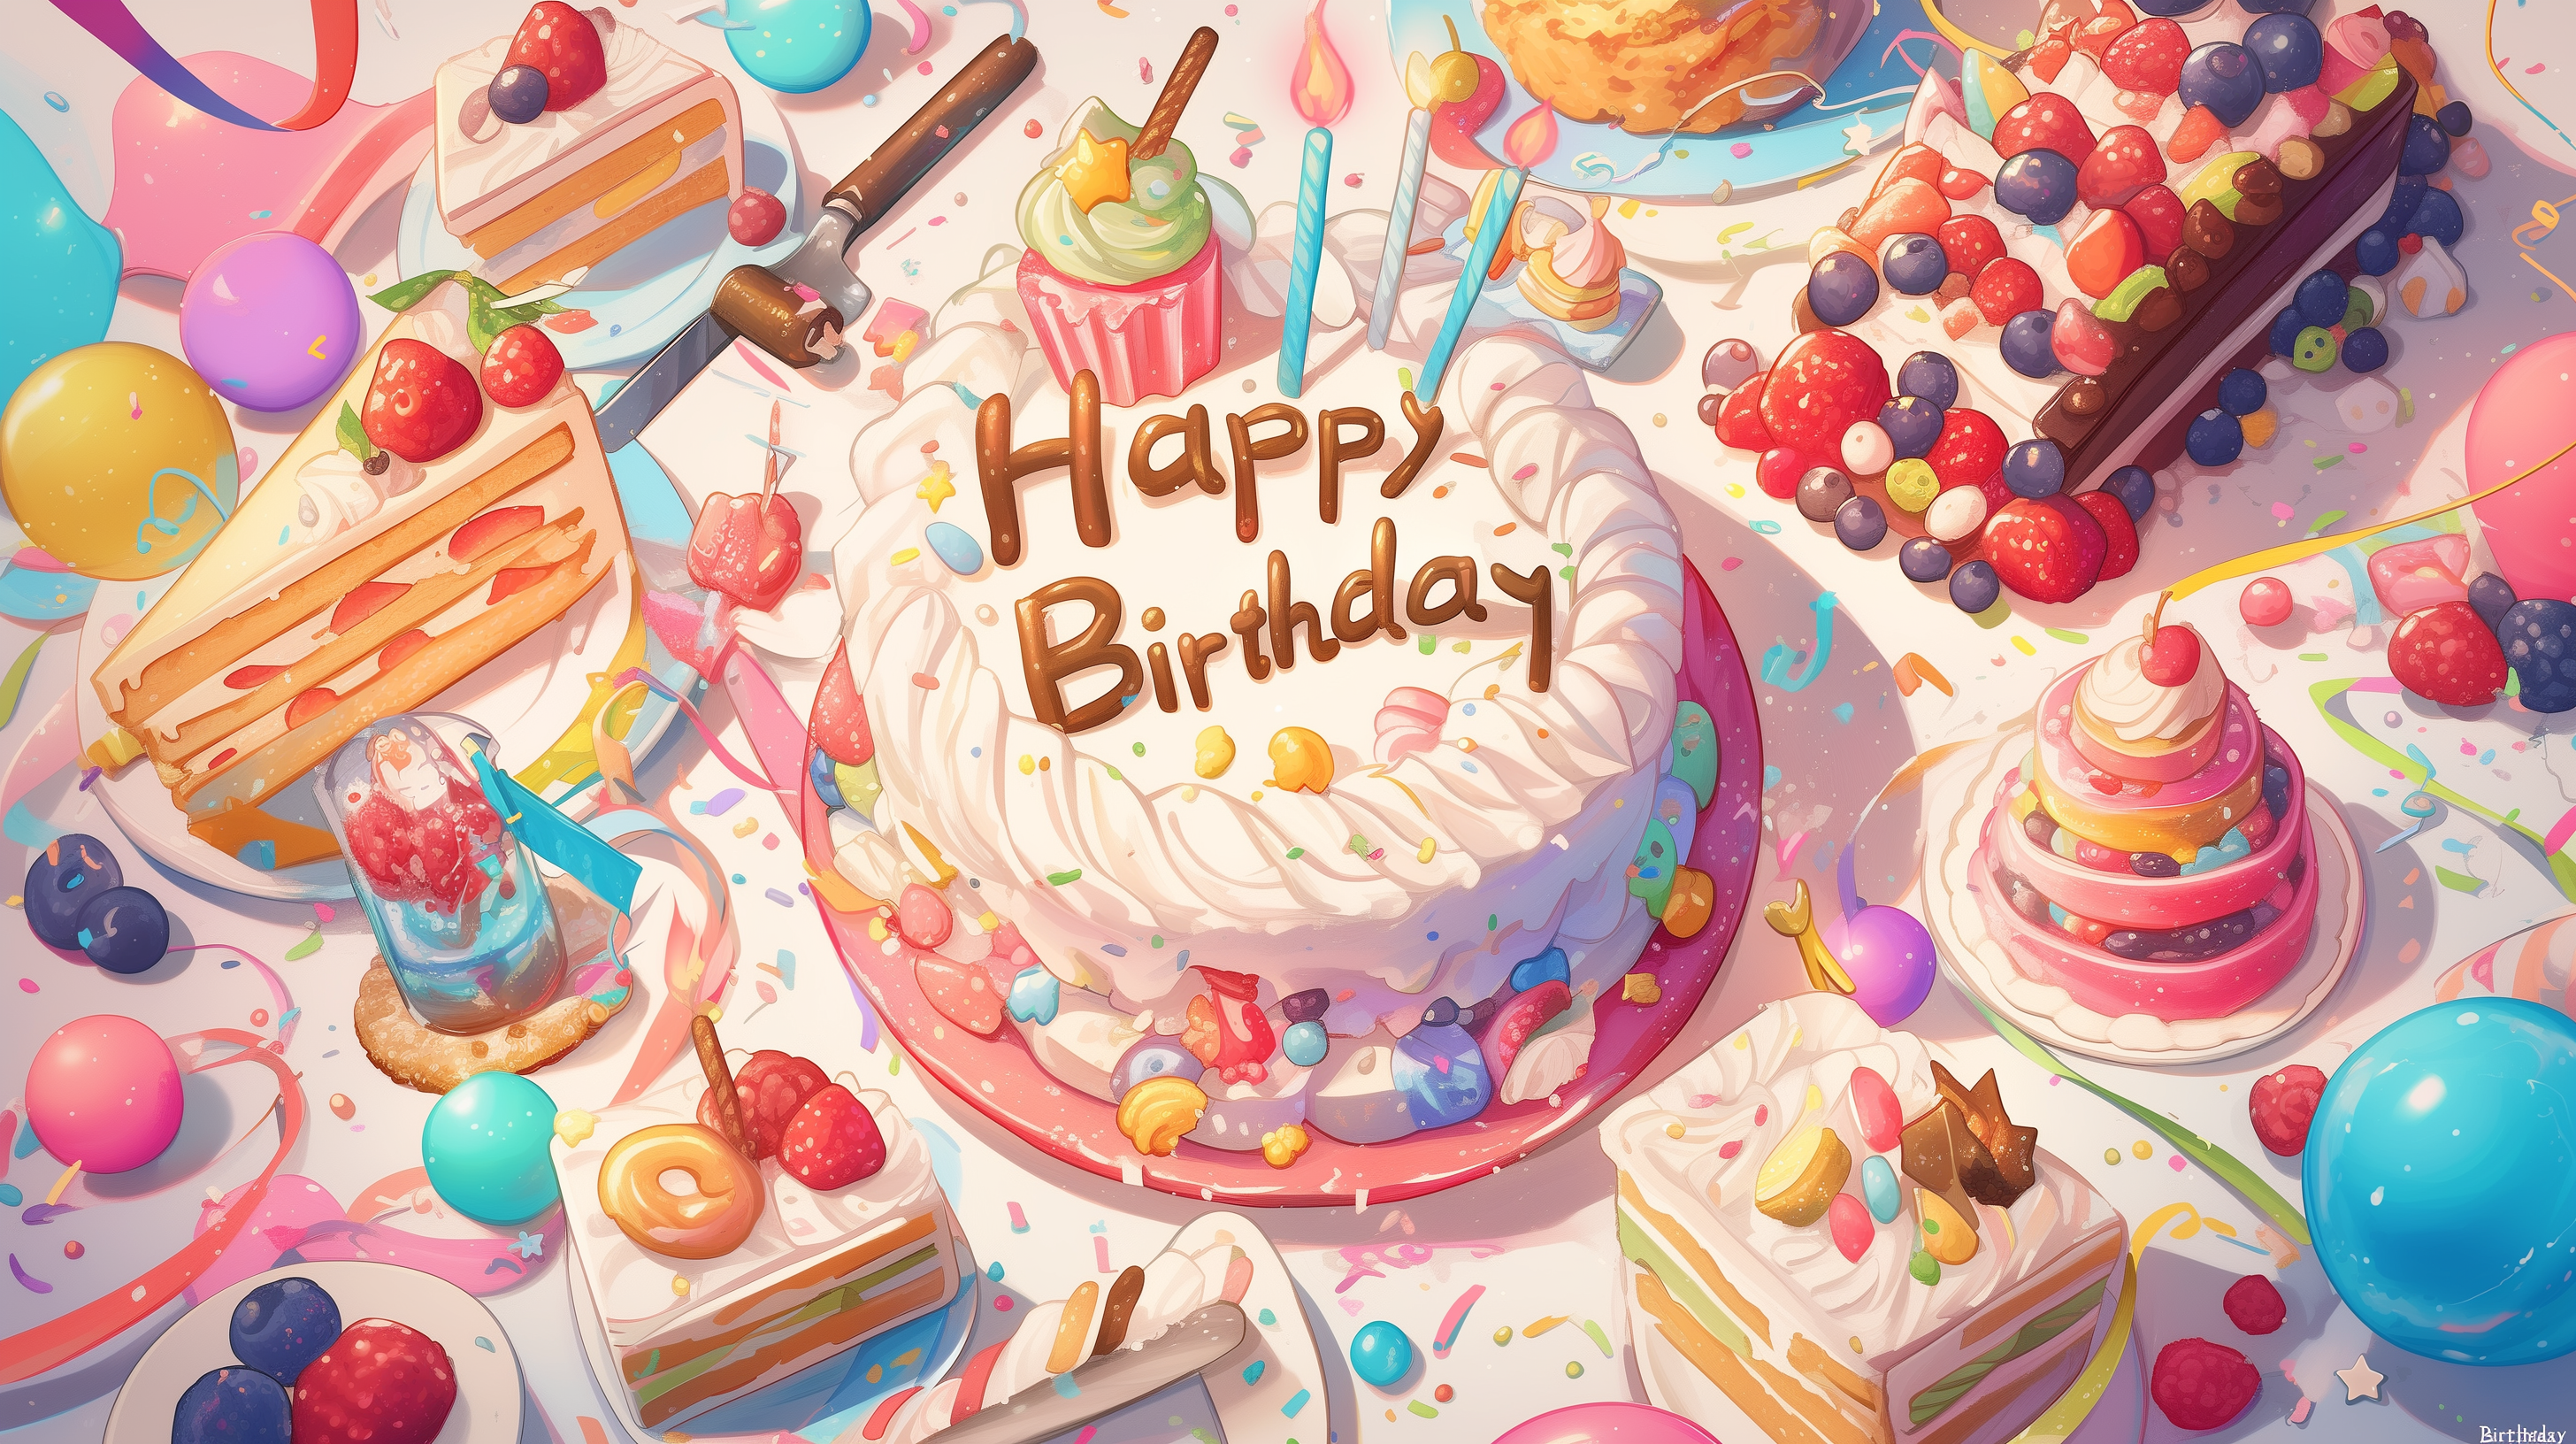 Colorful Happy Birthday cake illustration with sweets and balloons, perfect for HD desktop wallpaper and background.